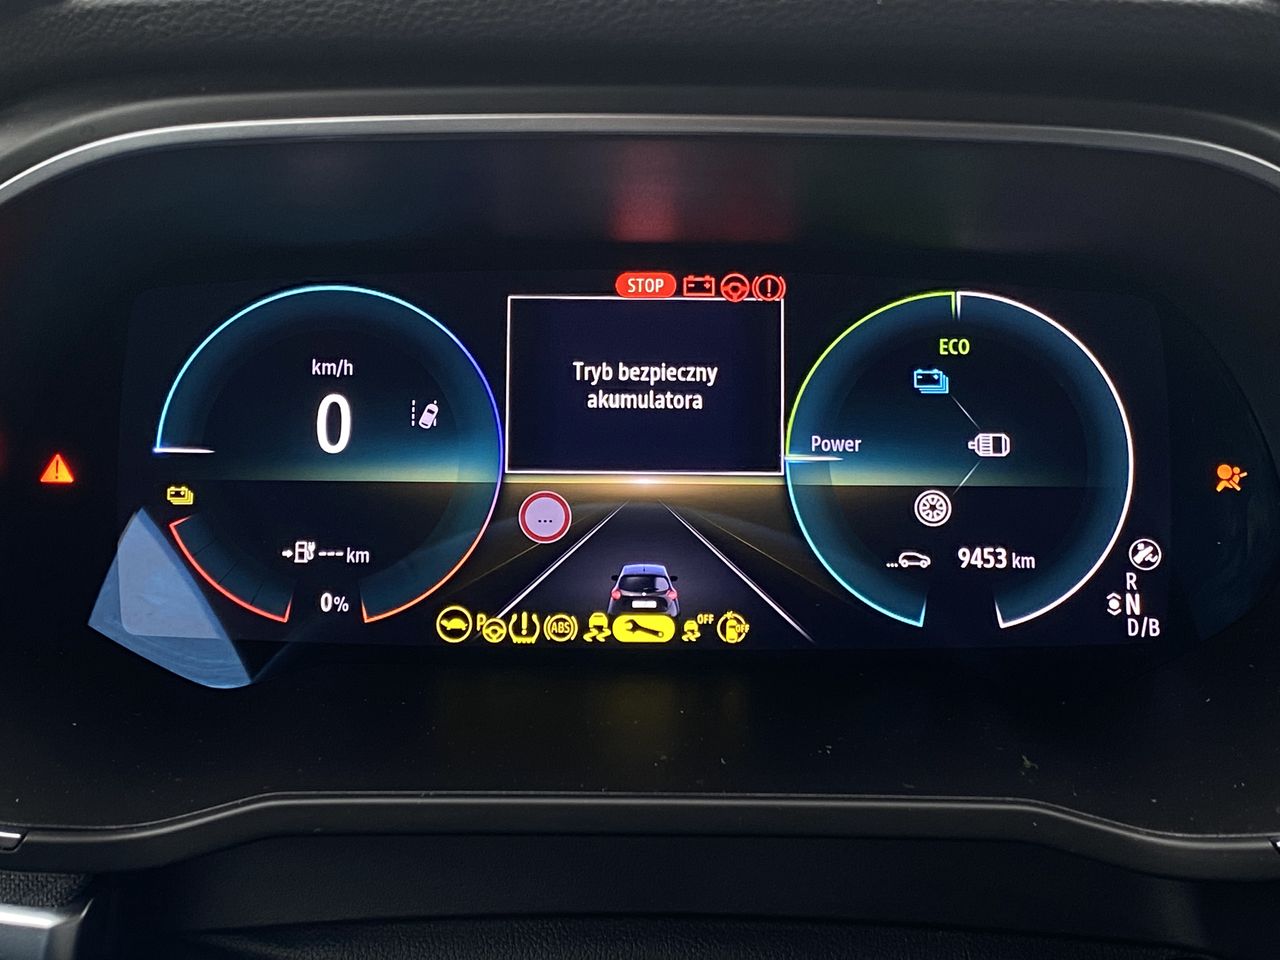 New indicators in cars. Not everyone knows what they mean